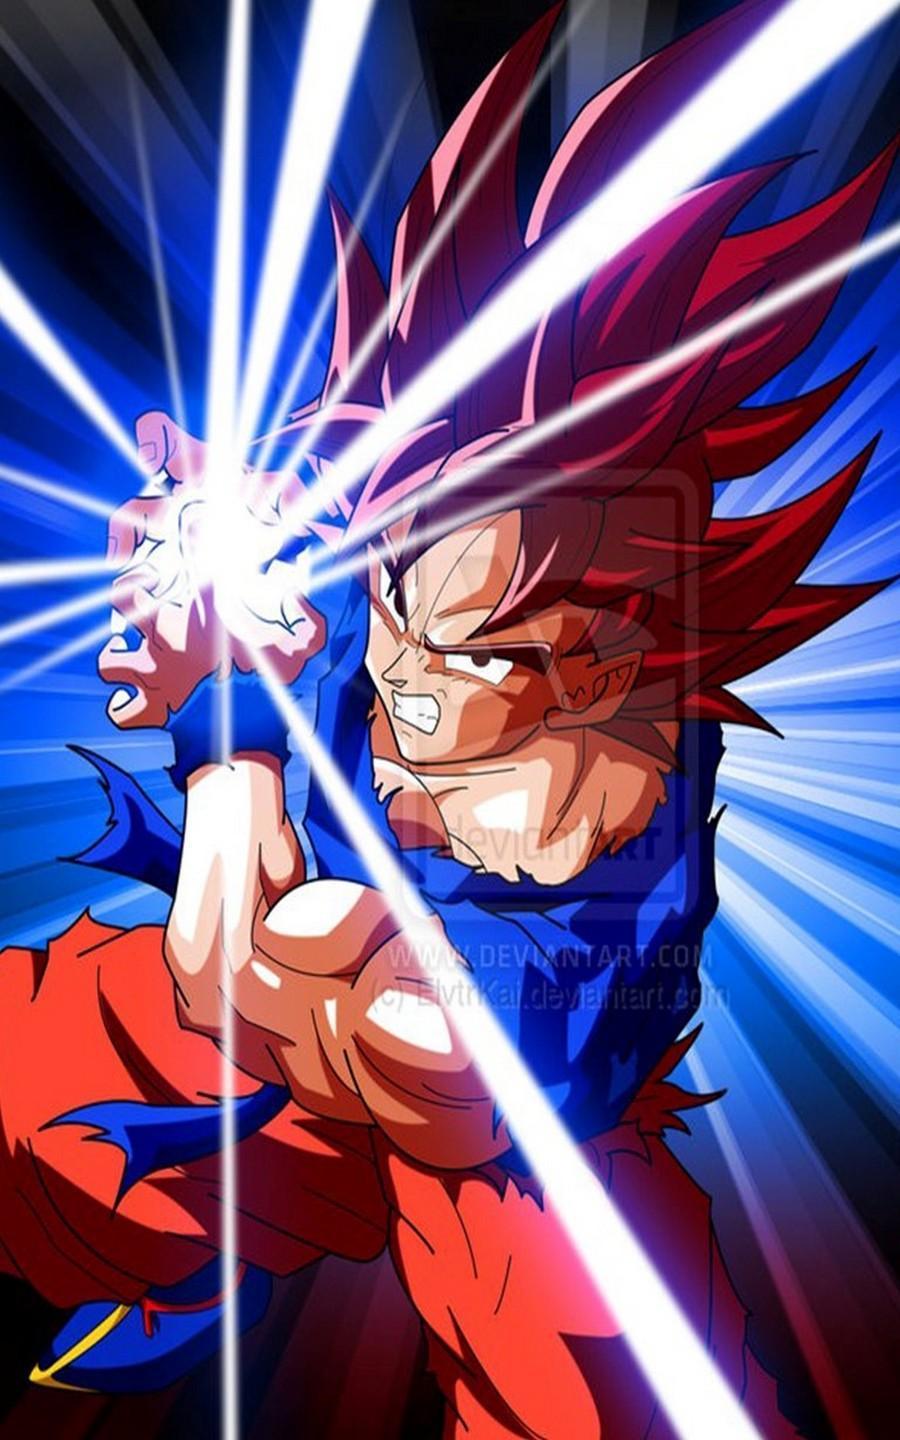 Goku HD Ultra Instinct wallpaper for Android